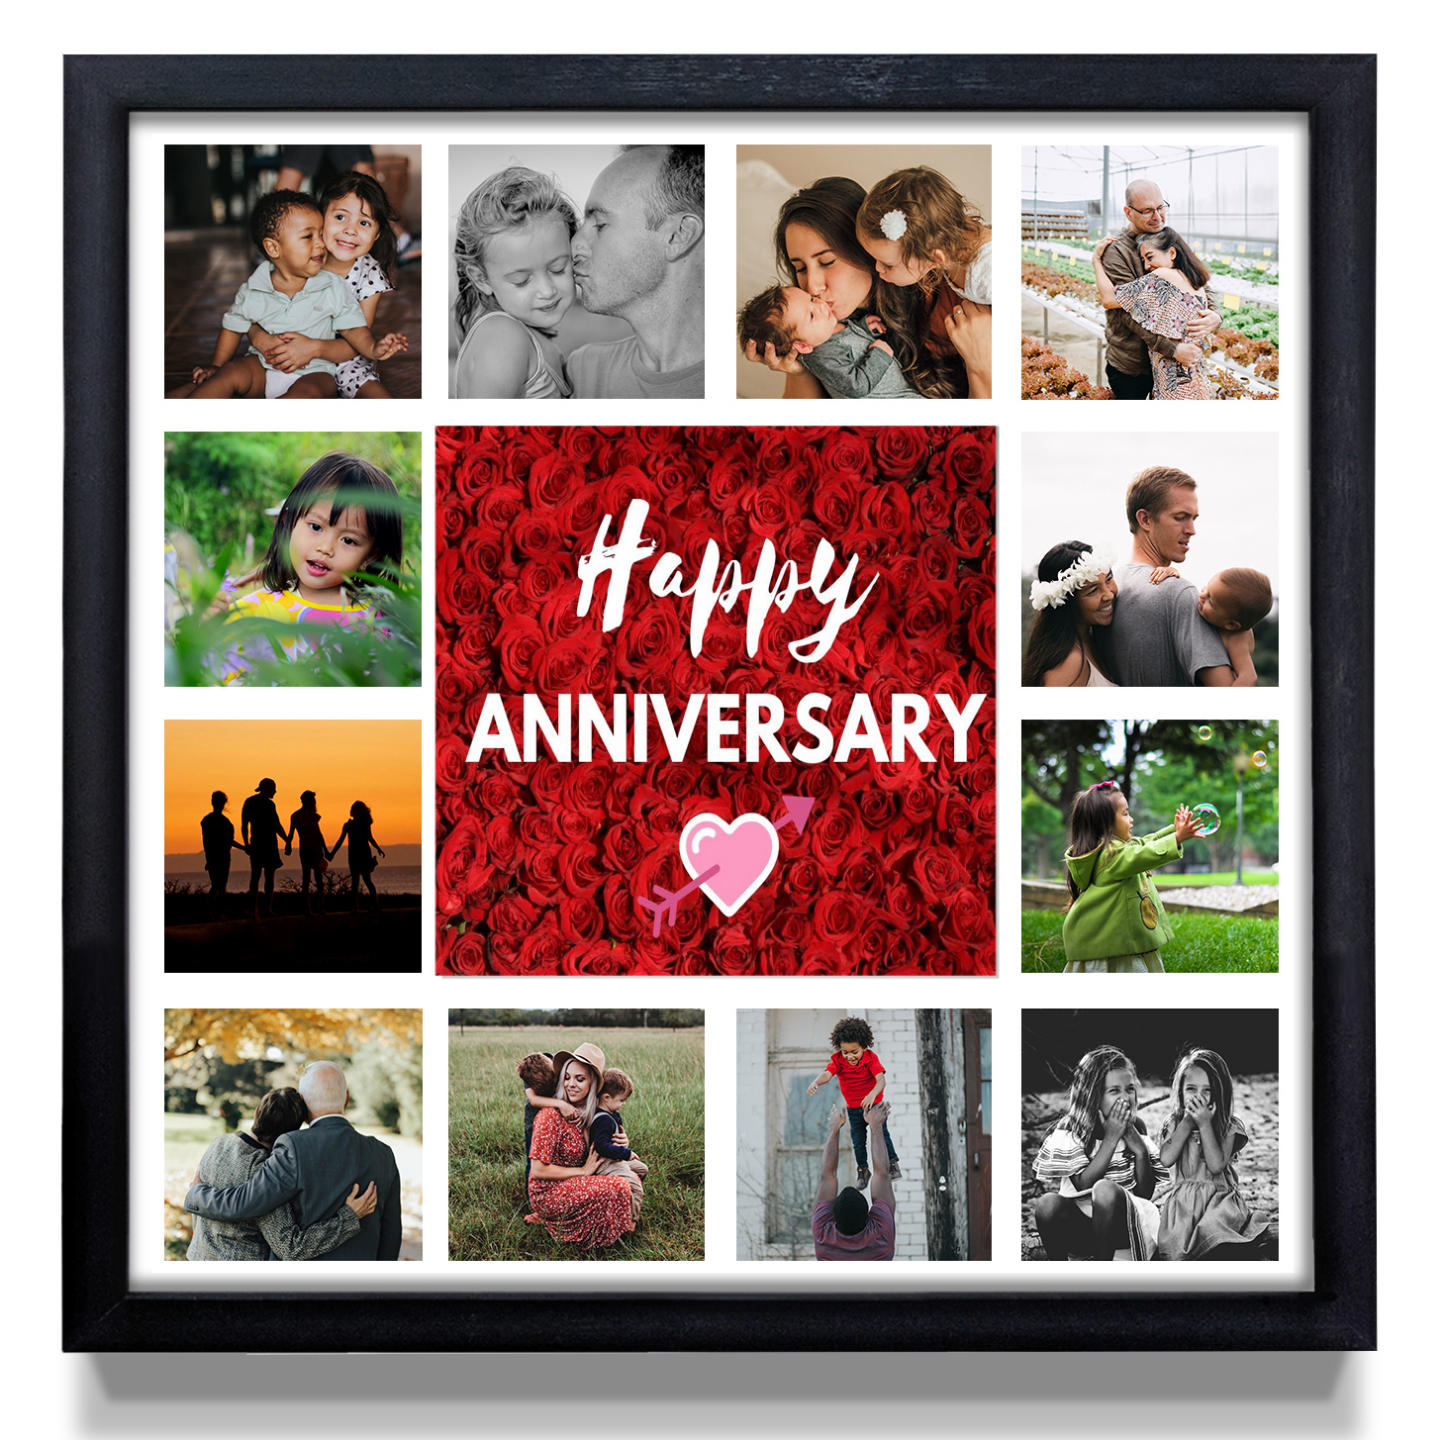 Happy Anniversary Collage frame Best gift for anniversary